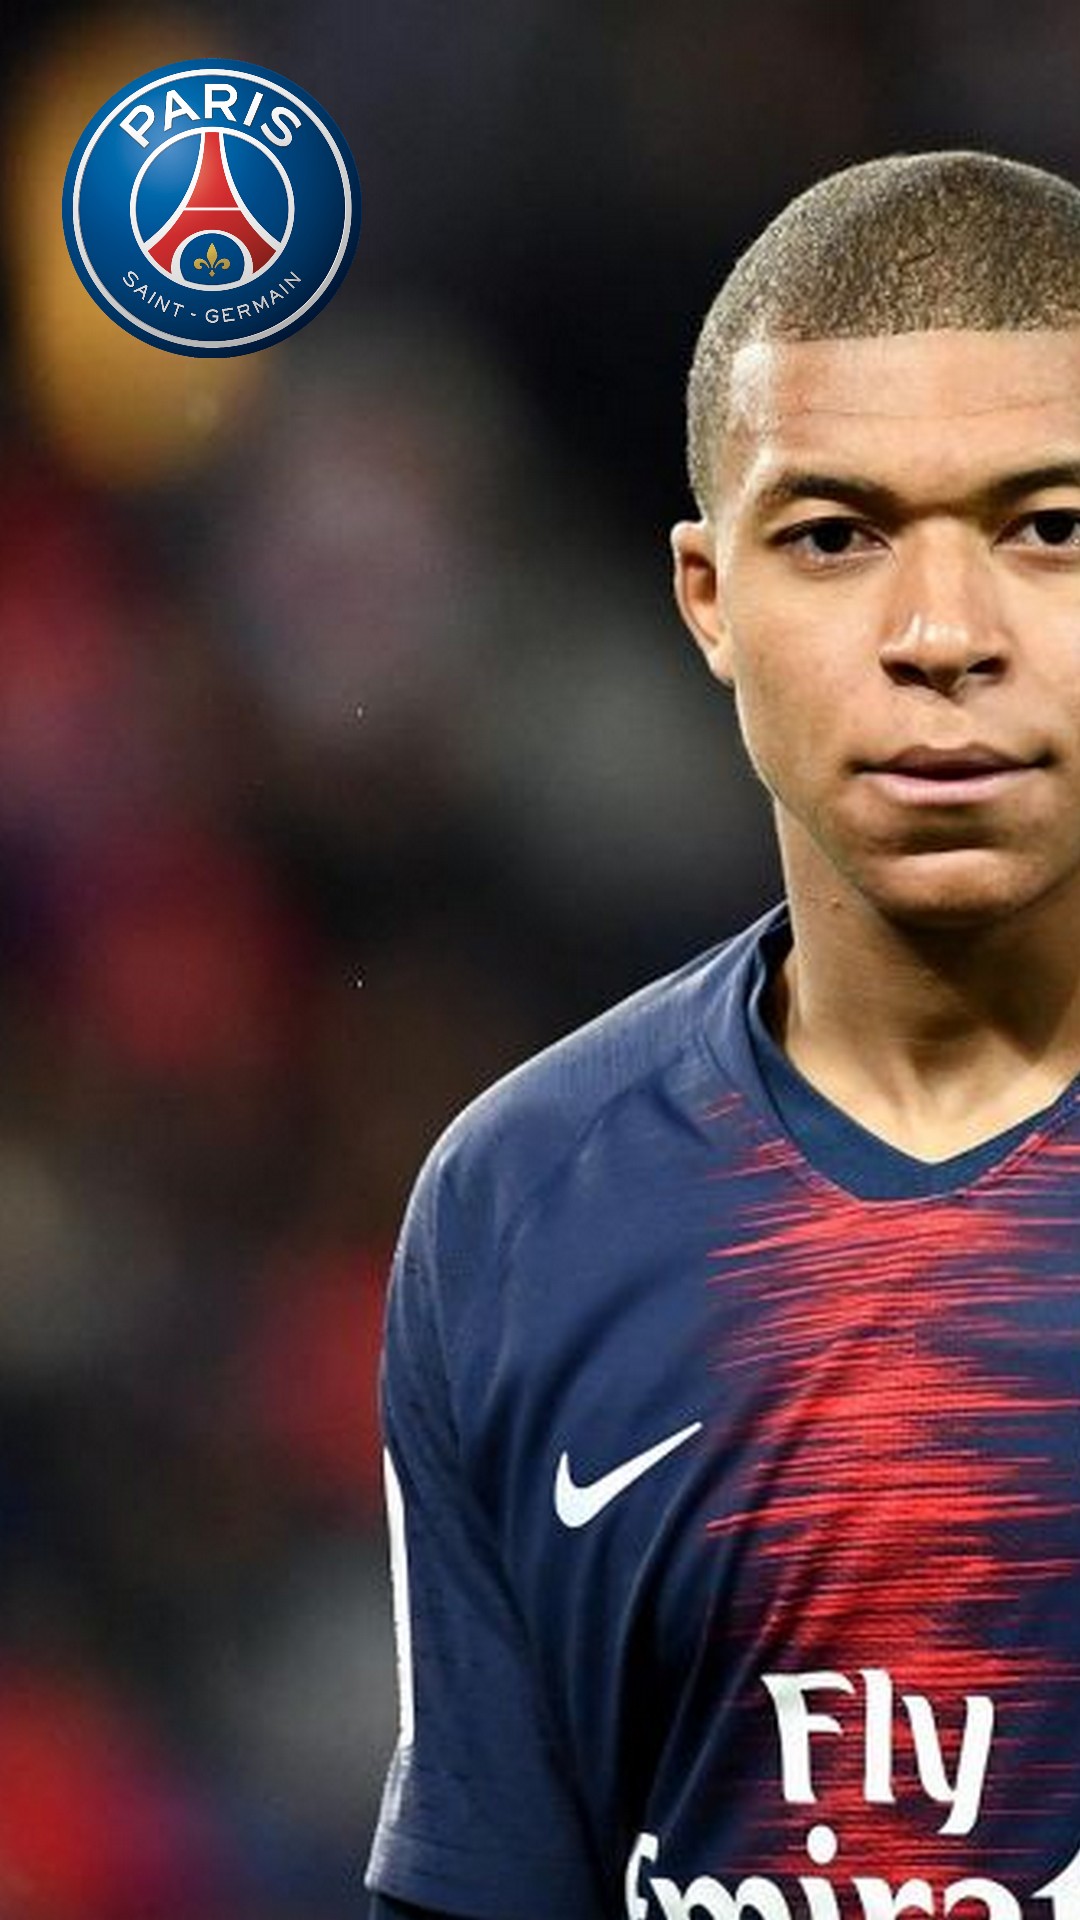 Free download Kylian Mbappe PSG iPhone Wallpapers 2019 Football Wallpaper  [1080x1920] for your Desktop, Mobile & Tablet | Explore 24+ PSG 2019  Wallpapers | PSG HD Wallpaper, David Beckham PSG HD Wallpaper, PSG Wallpaper